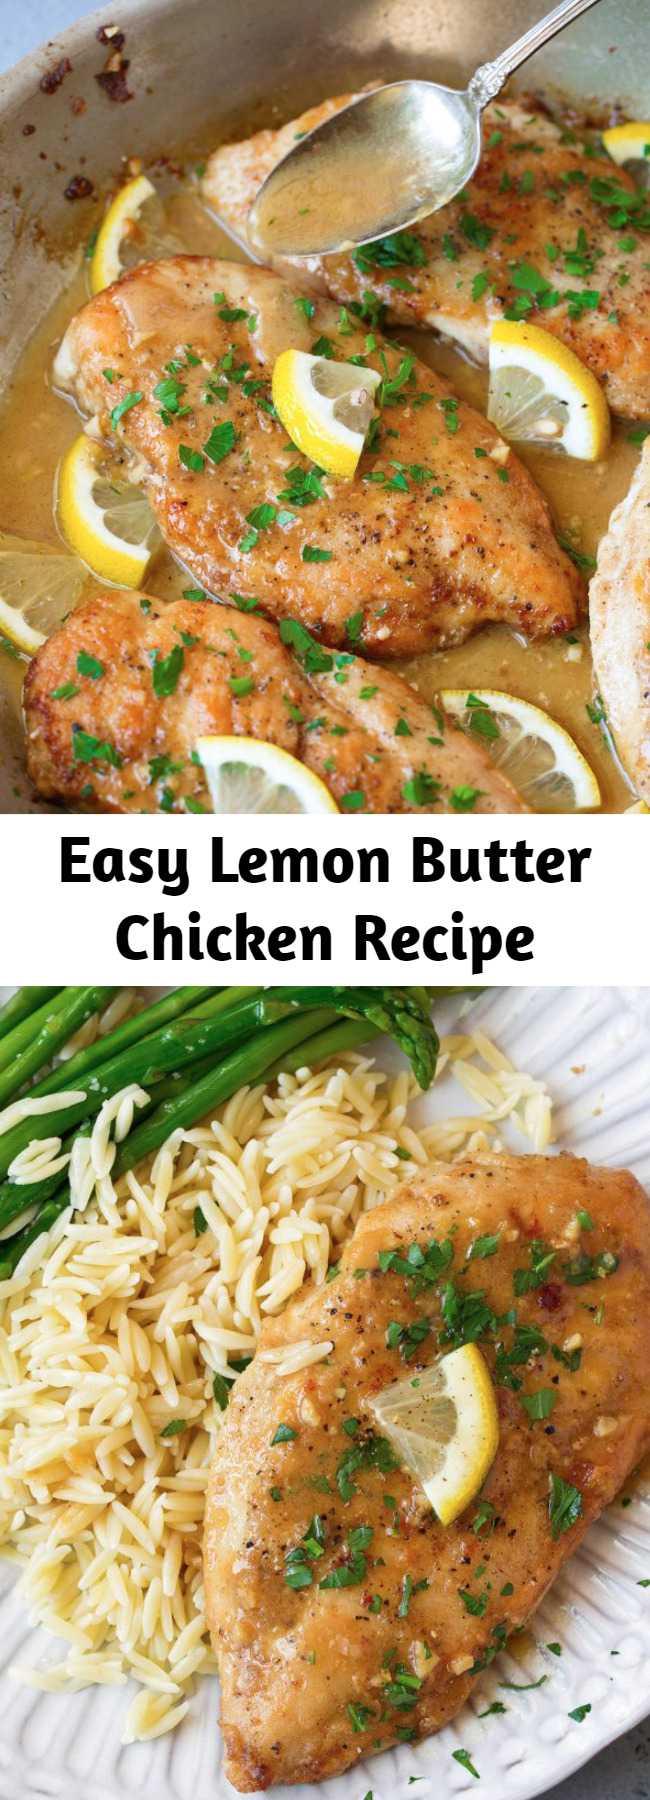 Easy Lemon Butter Chicken Recipe - The easiest yet tastiest chicken recipe! Pan seared chicken breasts are coated with a bright, tangy and rich lemon butter sauce that will leave you craving more! Perfect recipe for busy weeknights. Serve with orzo and asparagus to complete the meal. #lemon #chicken #chickenbreasts #dinnerideas #recipe